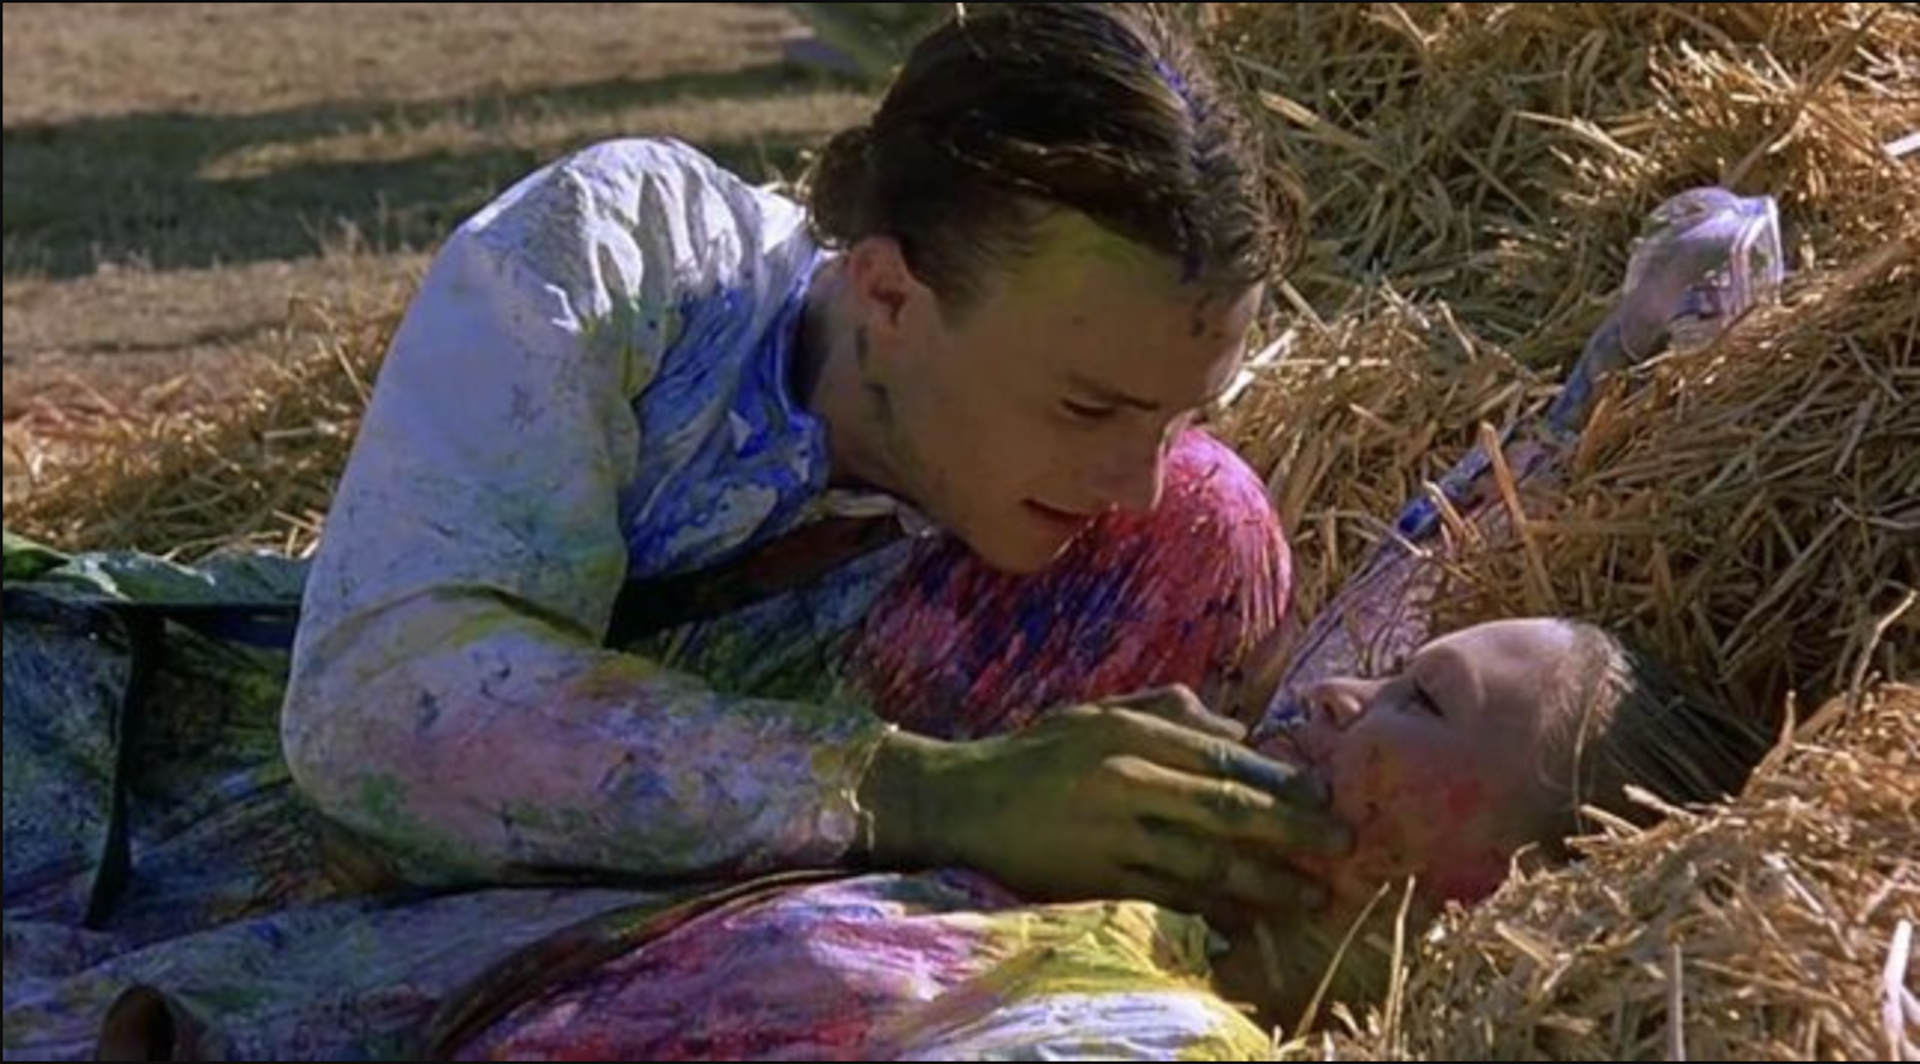 "10 Things I Hate About You" paintball scene